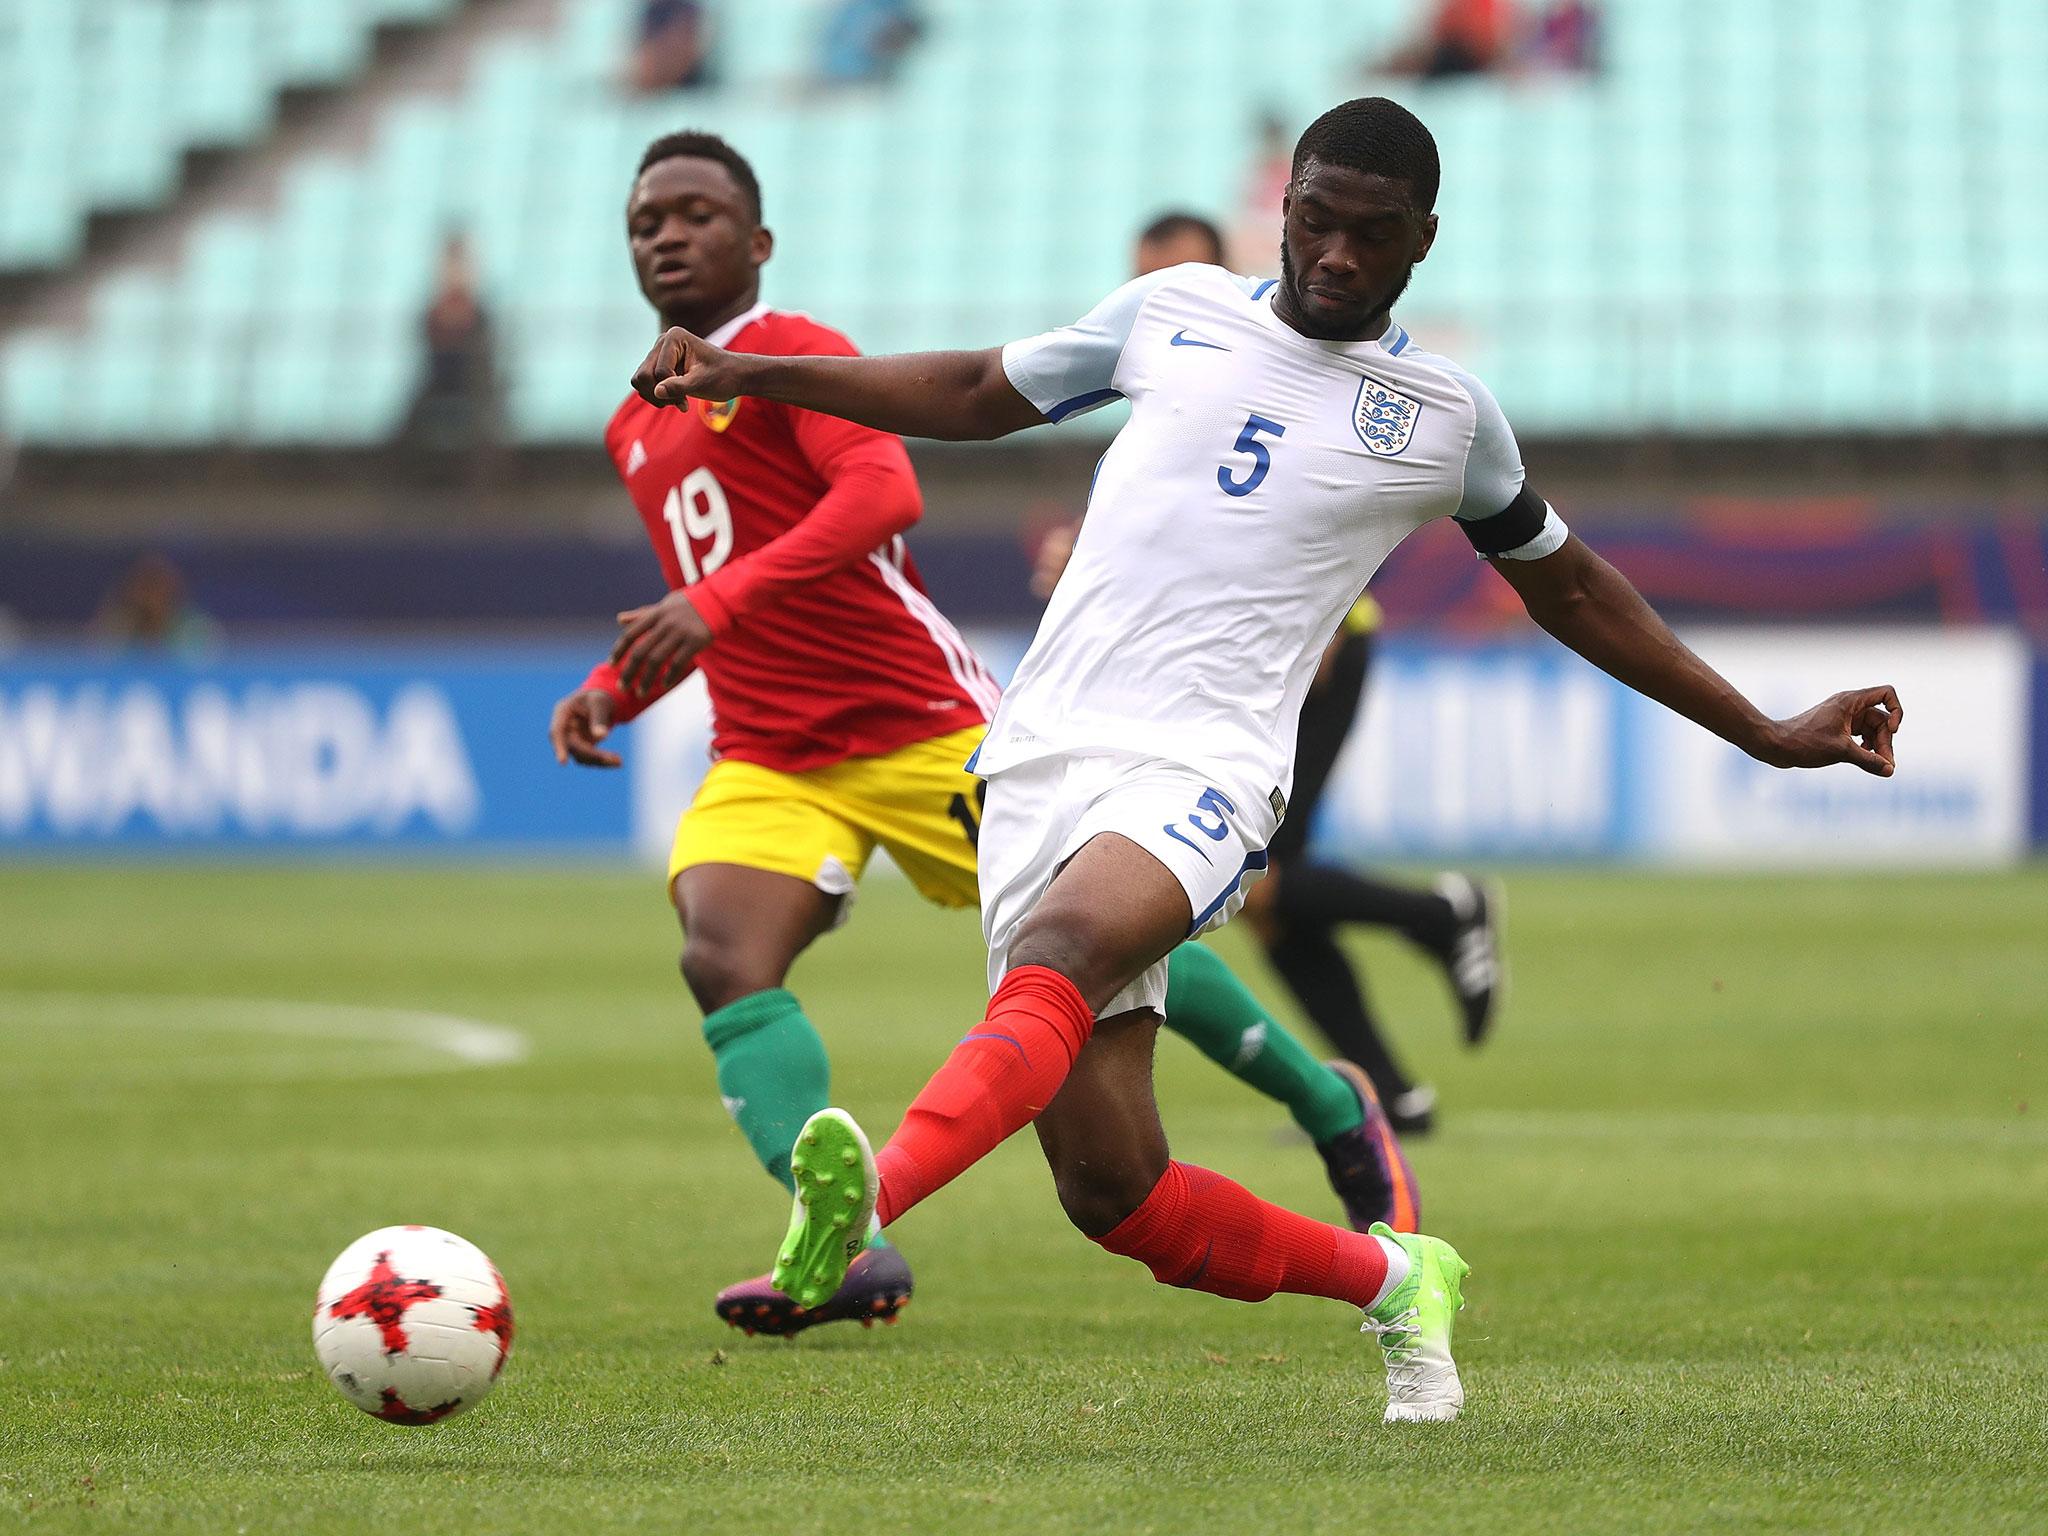 Fikayo Tomori scored a 45-metre own-goal during England Under-20's clash against Guinea Under-20's